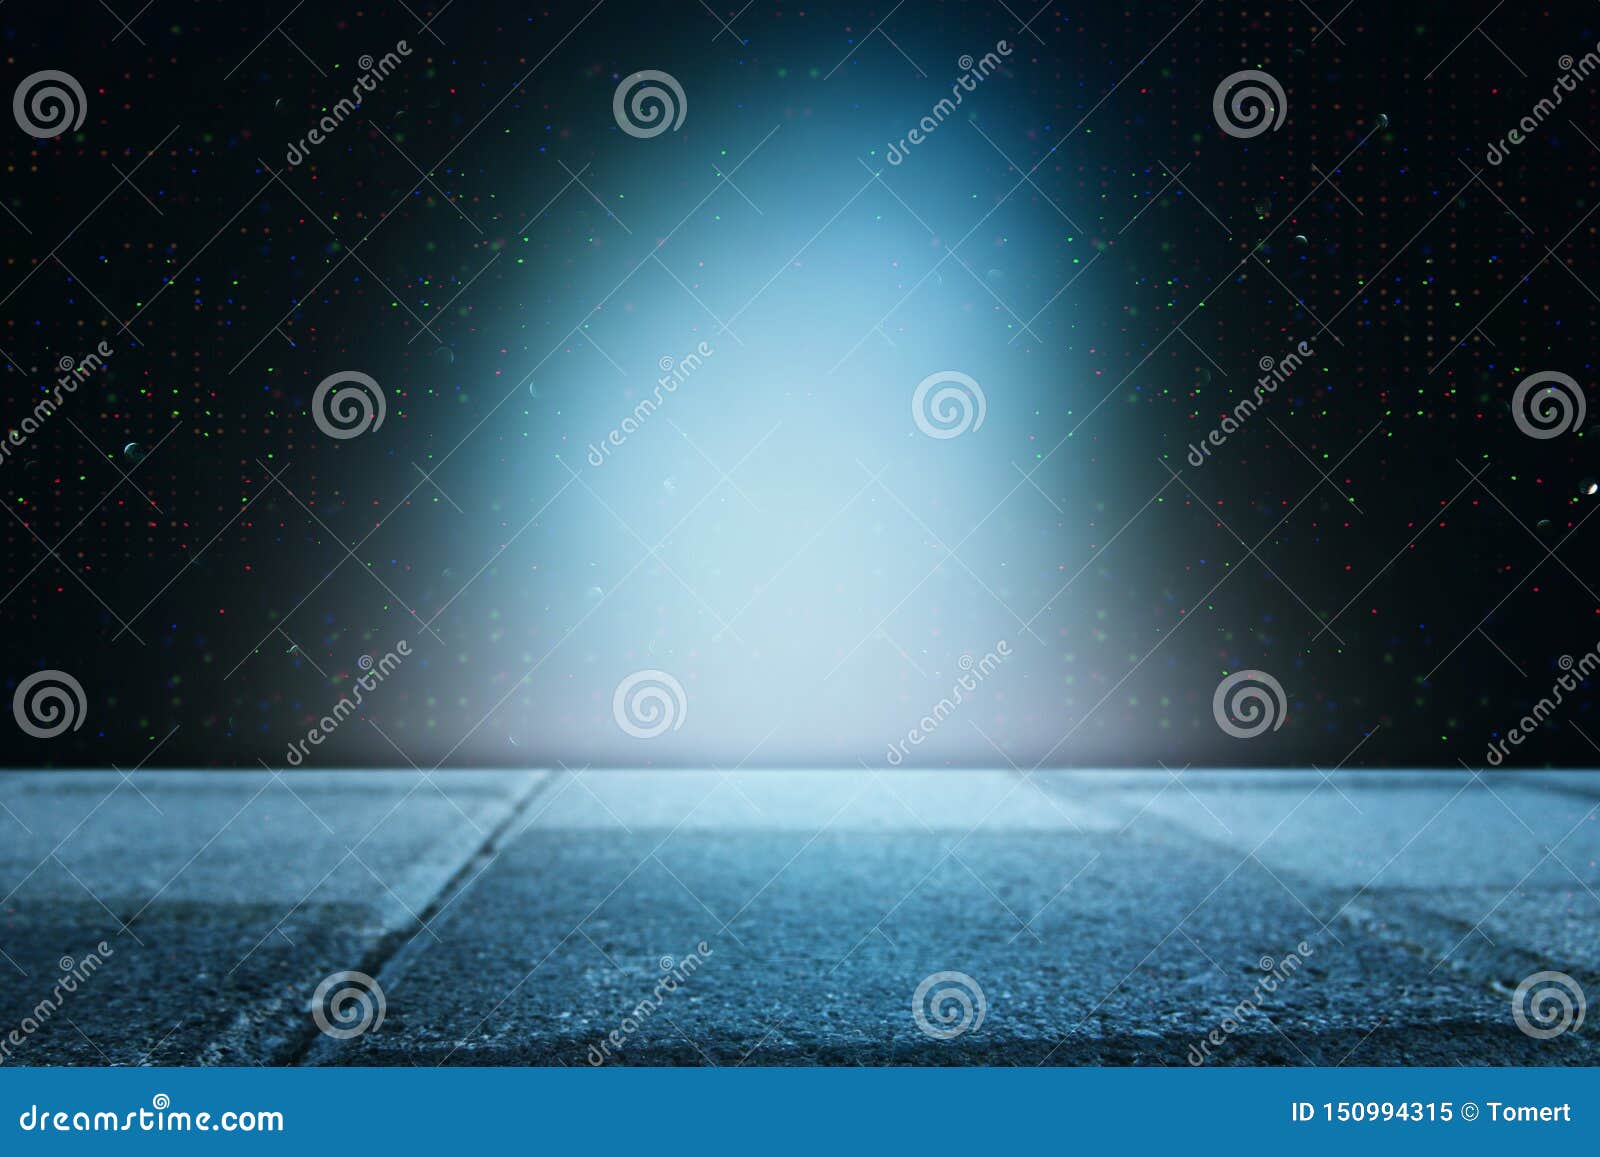 Background of Abstract Dark Concentrate Floor Scene with Mist or Fog ...